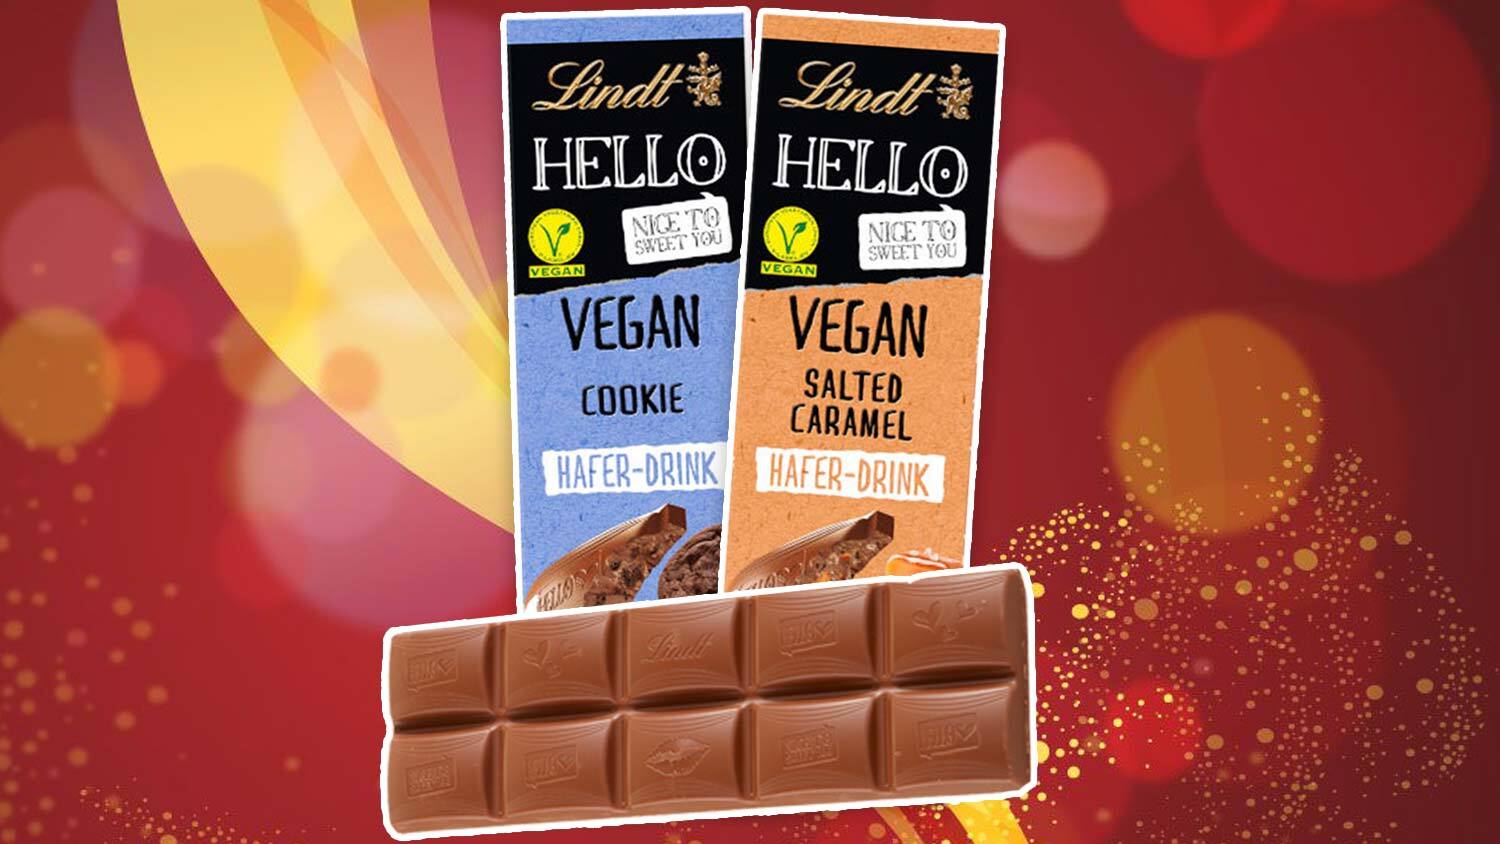 Lindt Is Launching Vegan Milk Chocolate in Germany This Christmas